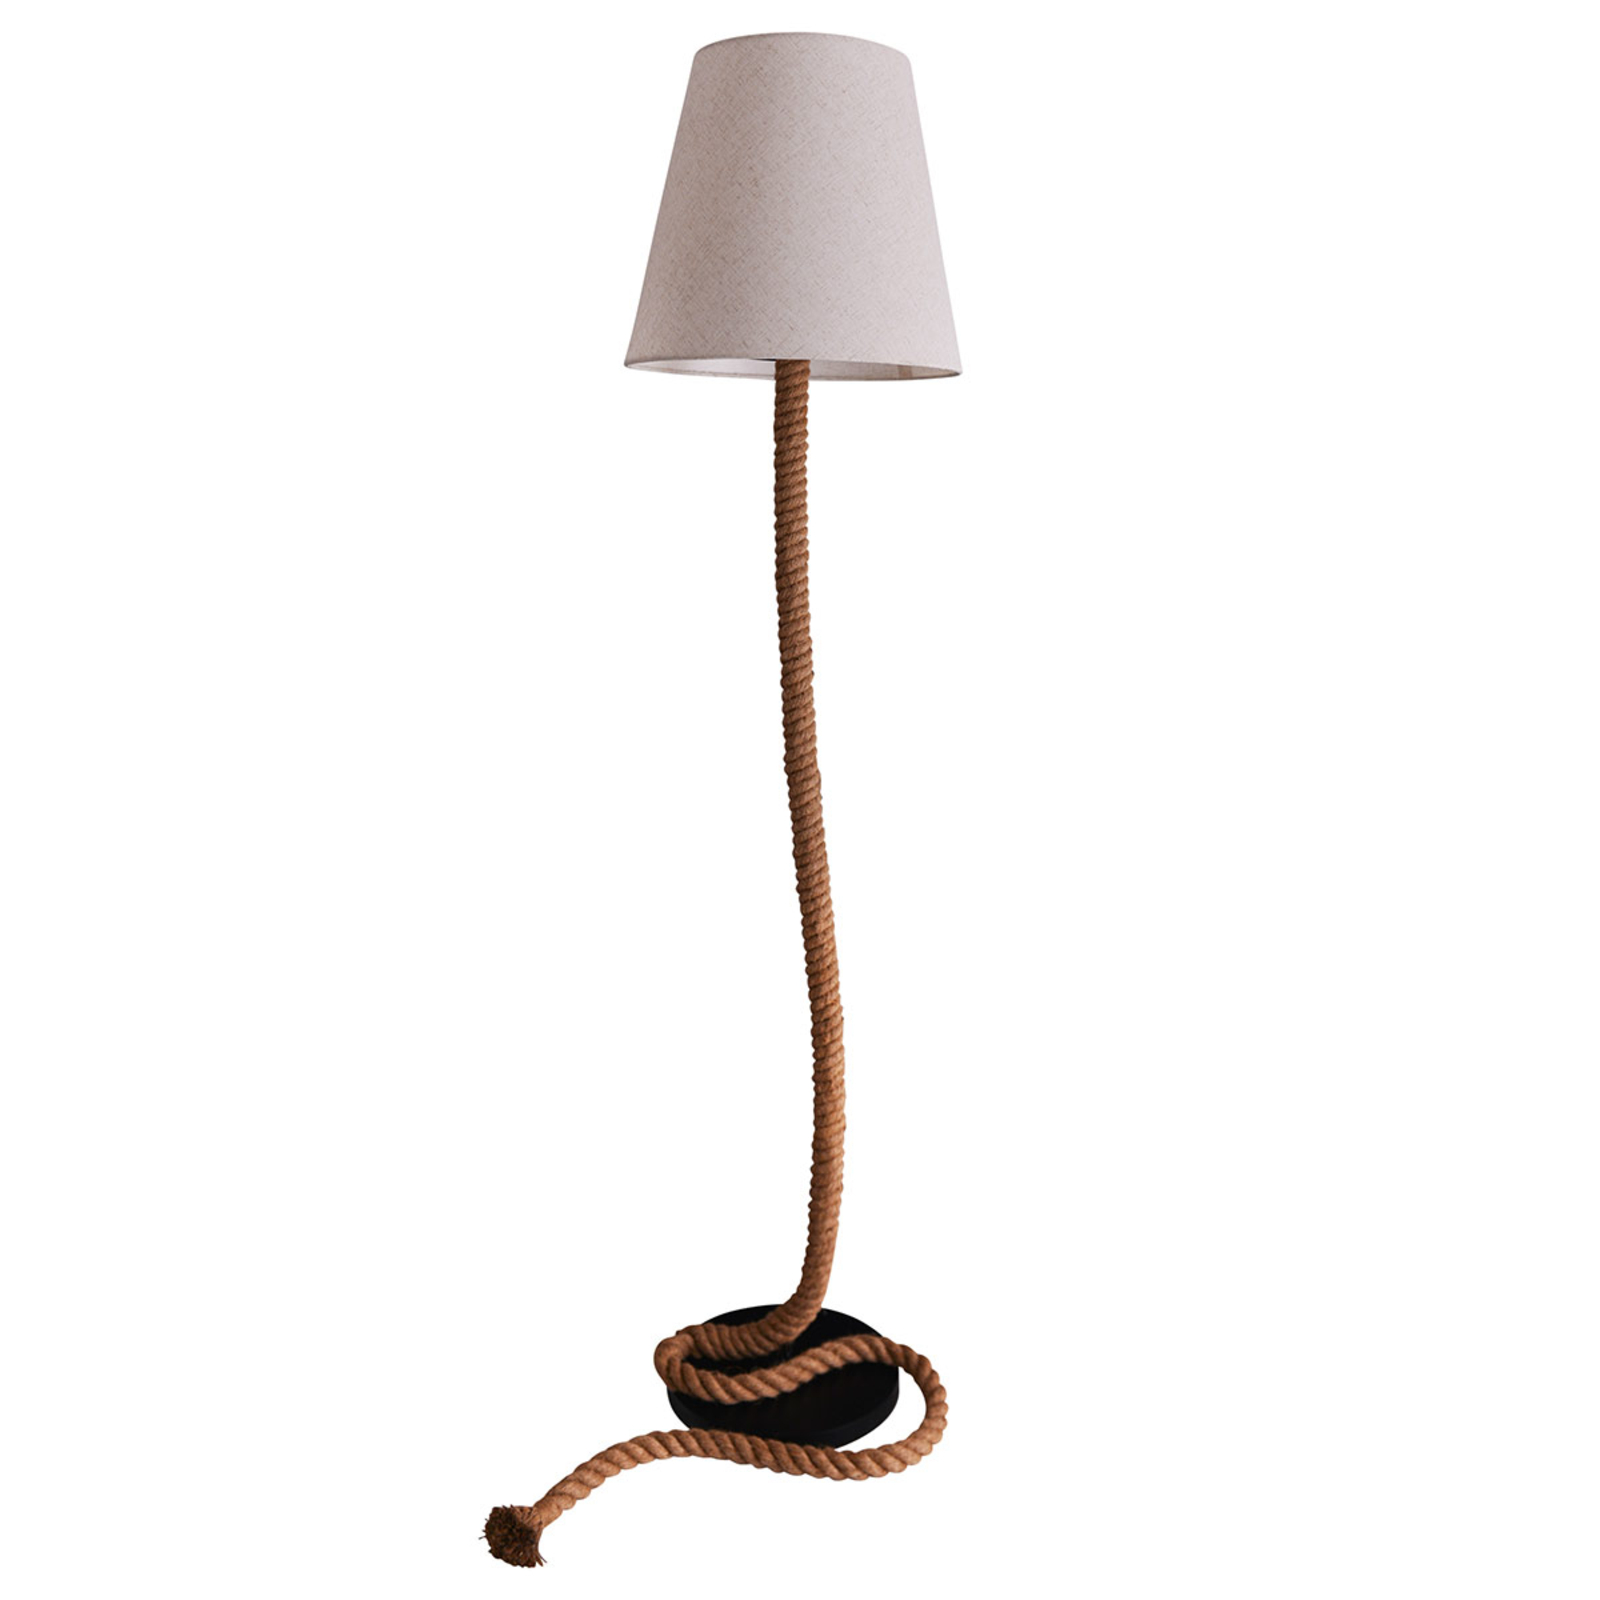 Rope fabric floor lamp with natural rope